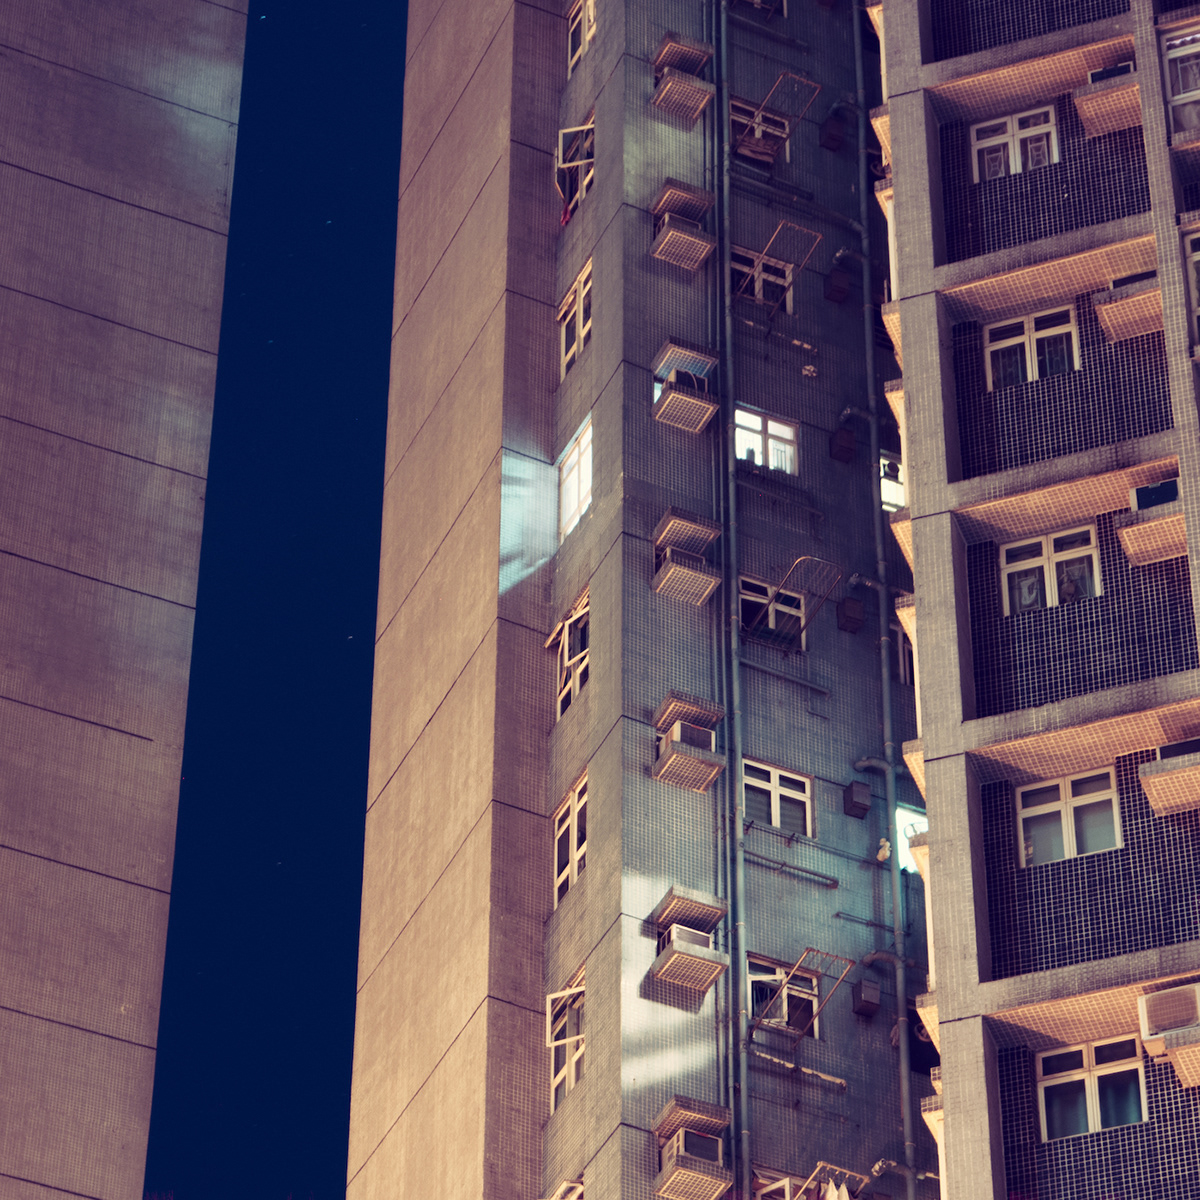 Night view of an apartment building with glowing windows. Hong Kong